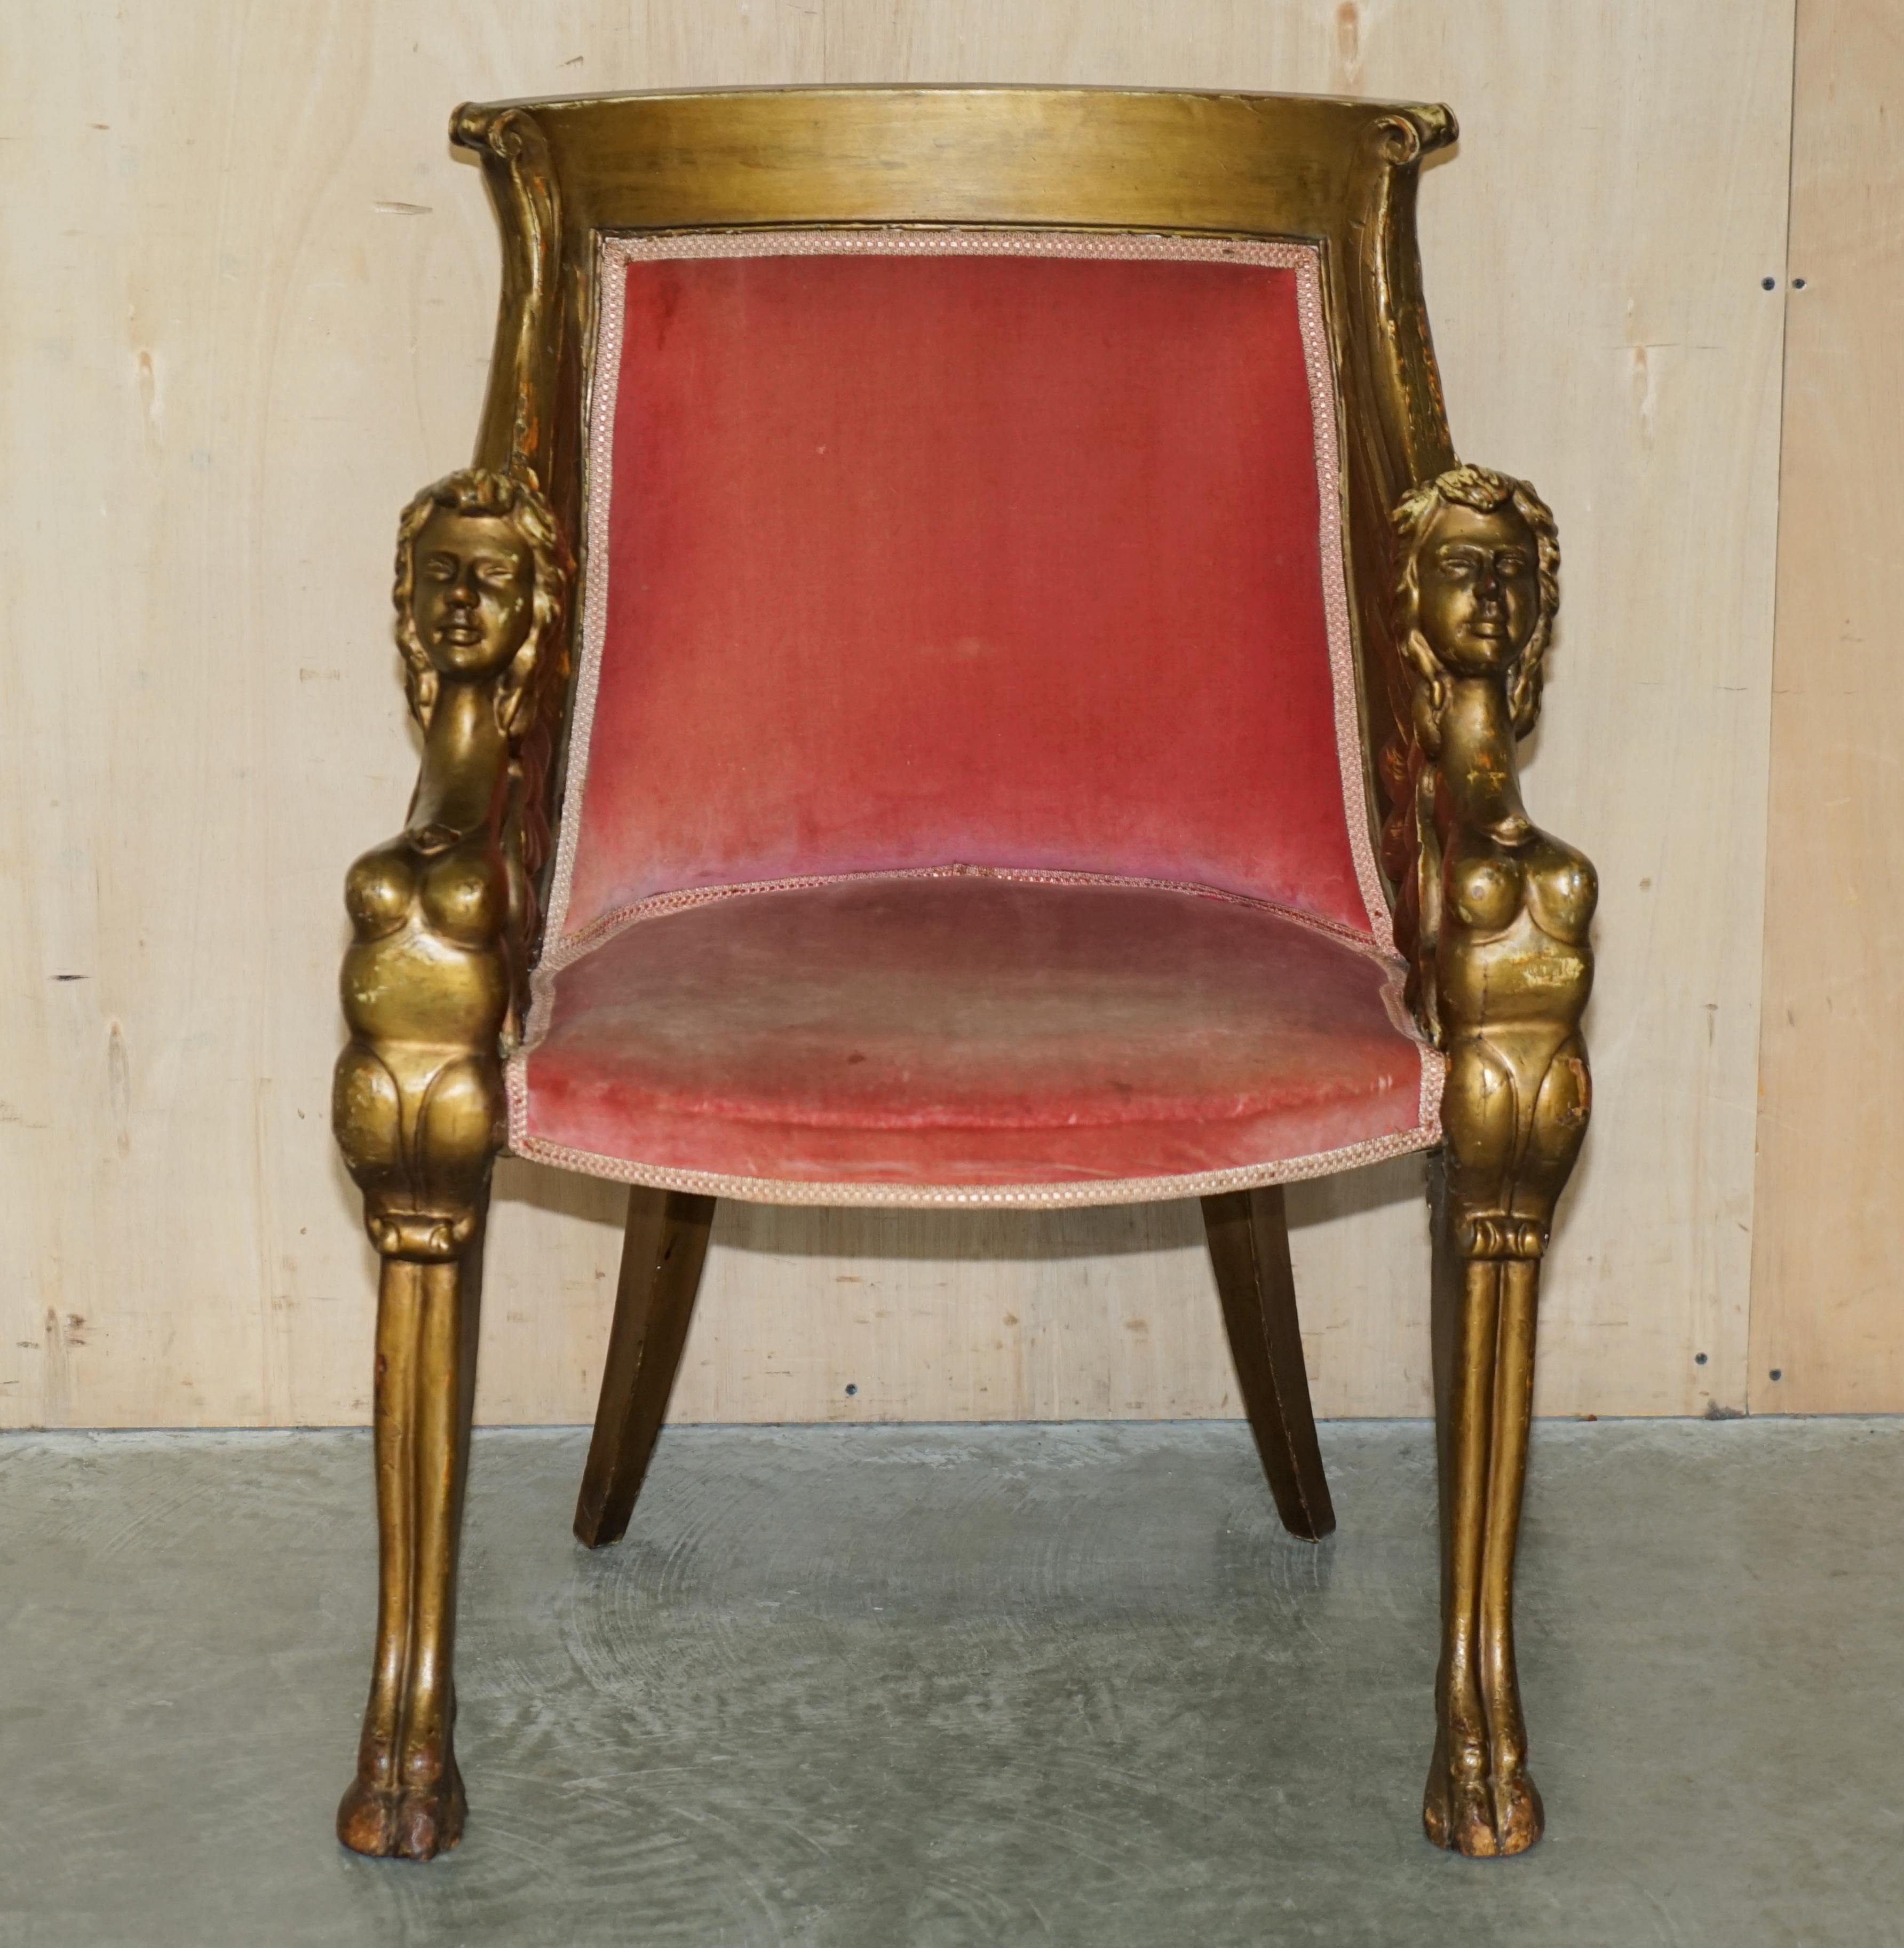 English After Thomas Hope Antique circa 1780 George III Hand Carved Giltwood Armchair For Sale